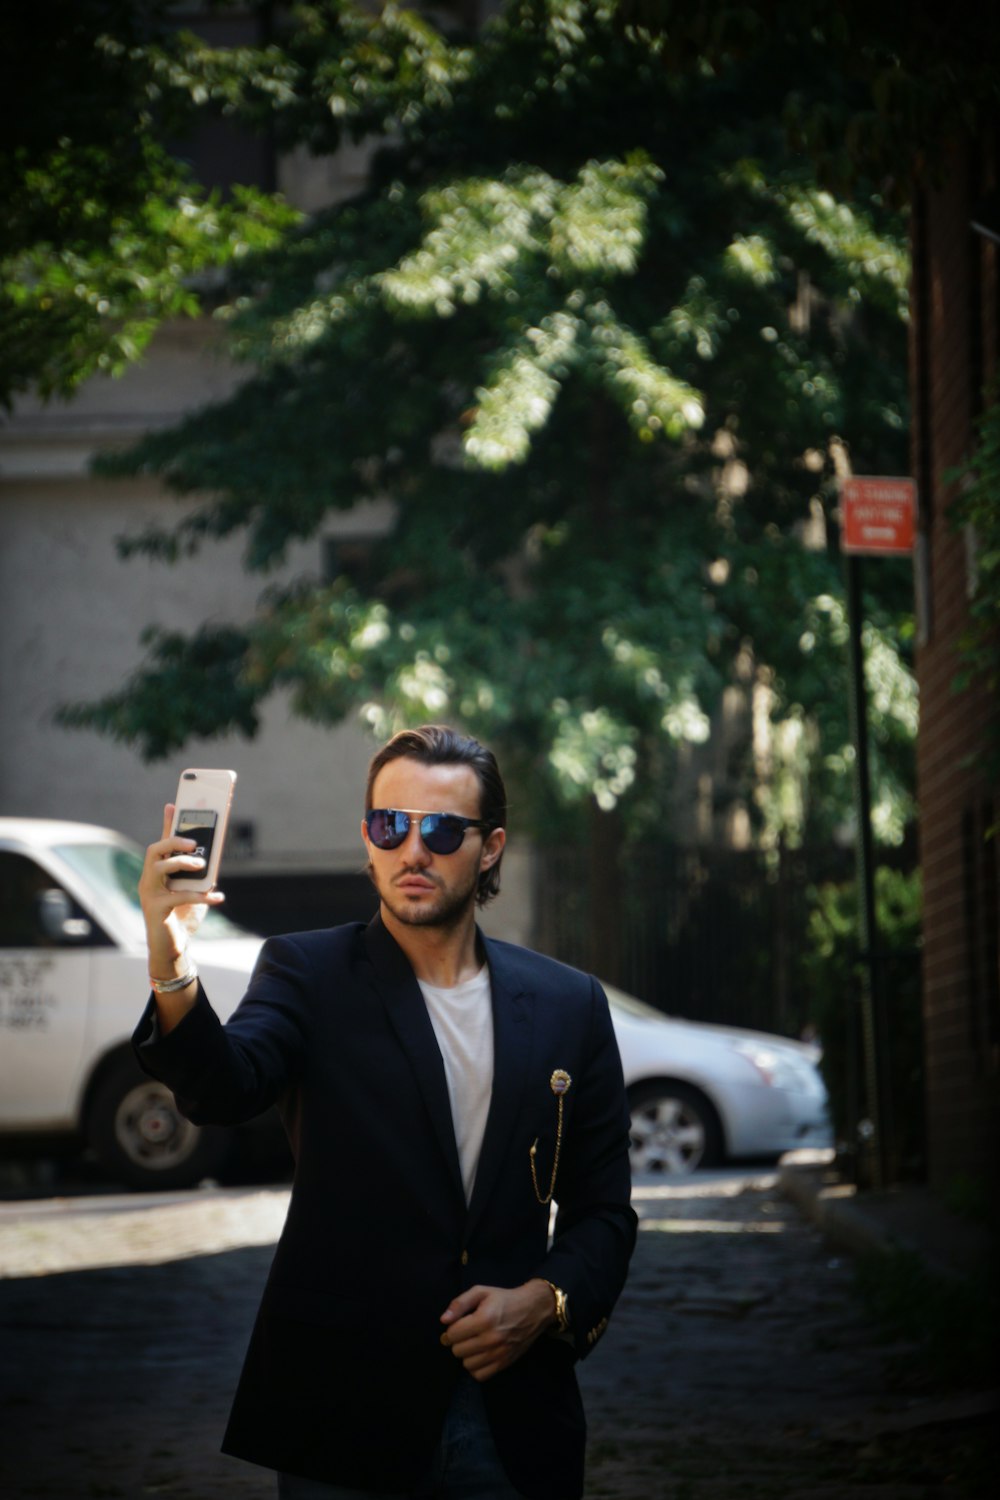 a man walking down a street holding up a cell phone